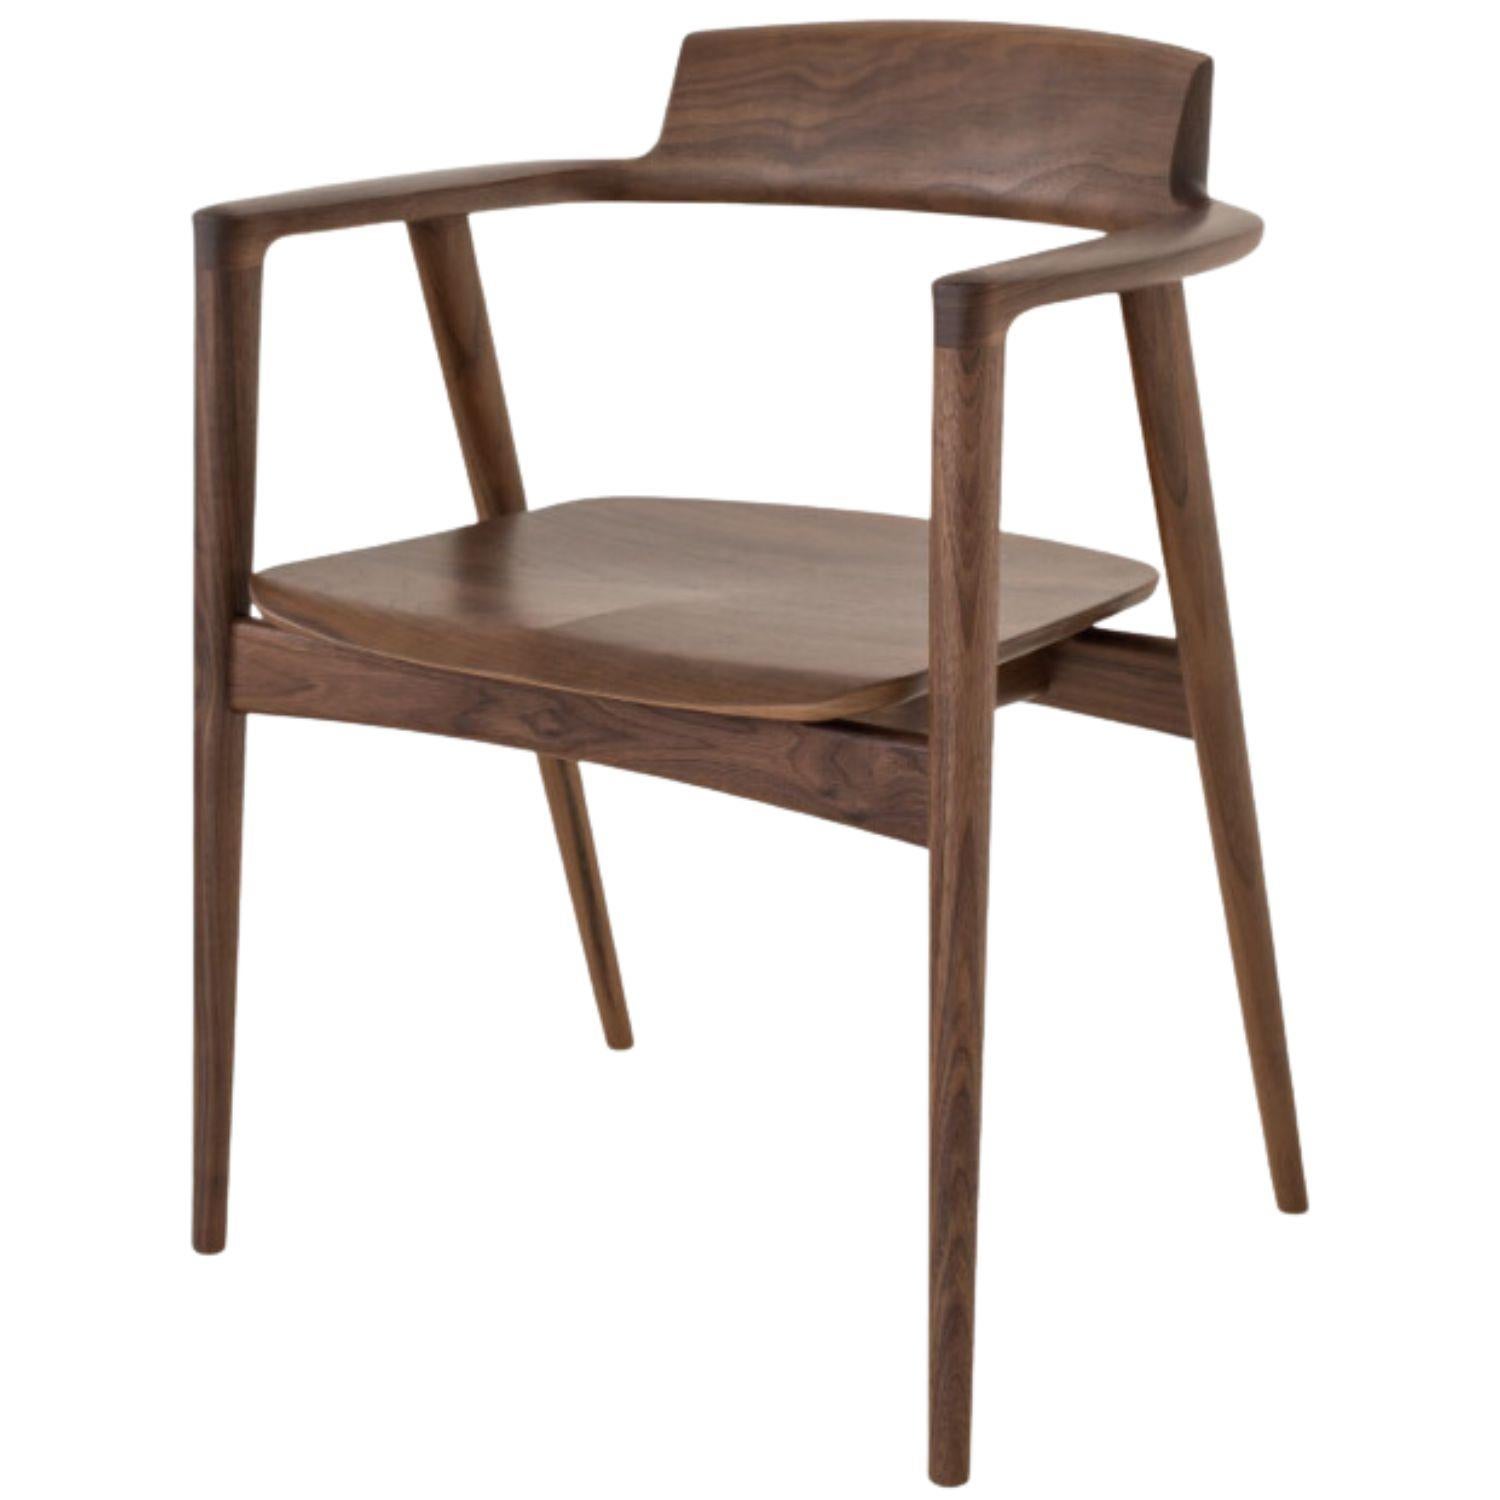 Motomi Kawakami 'Seoto KD221' Dining Armchair in Upholstery and Walnut for Hida For Sale 2